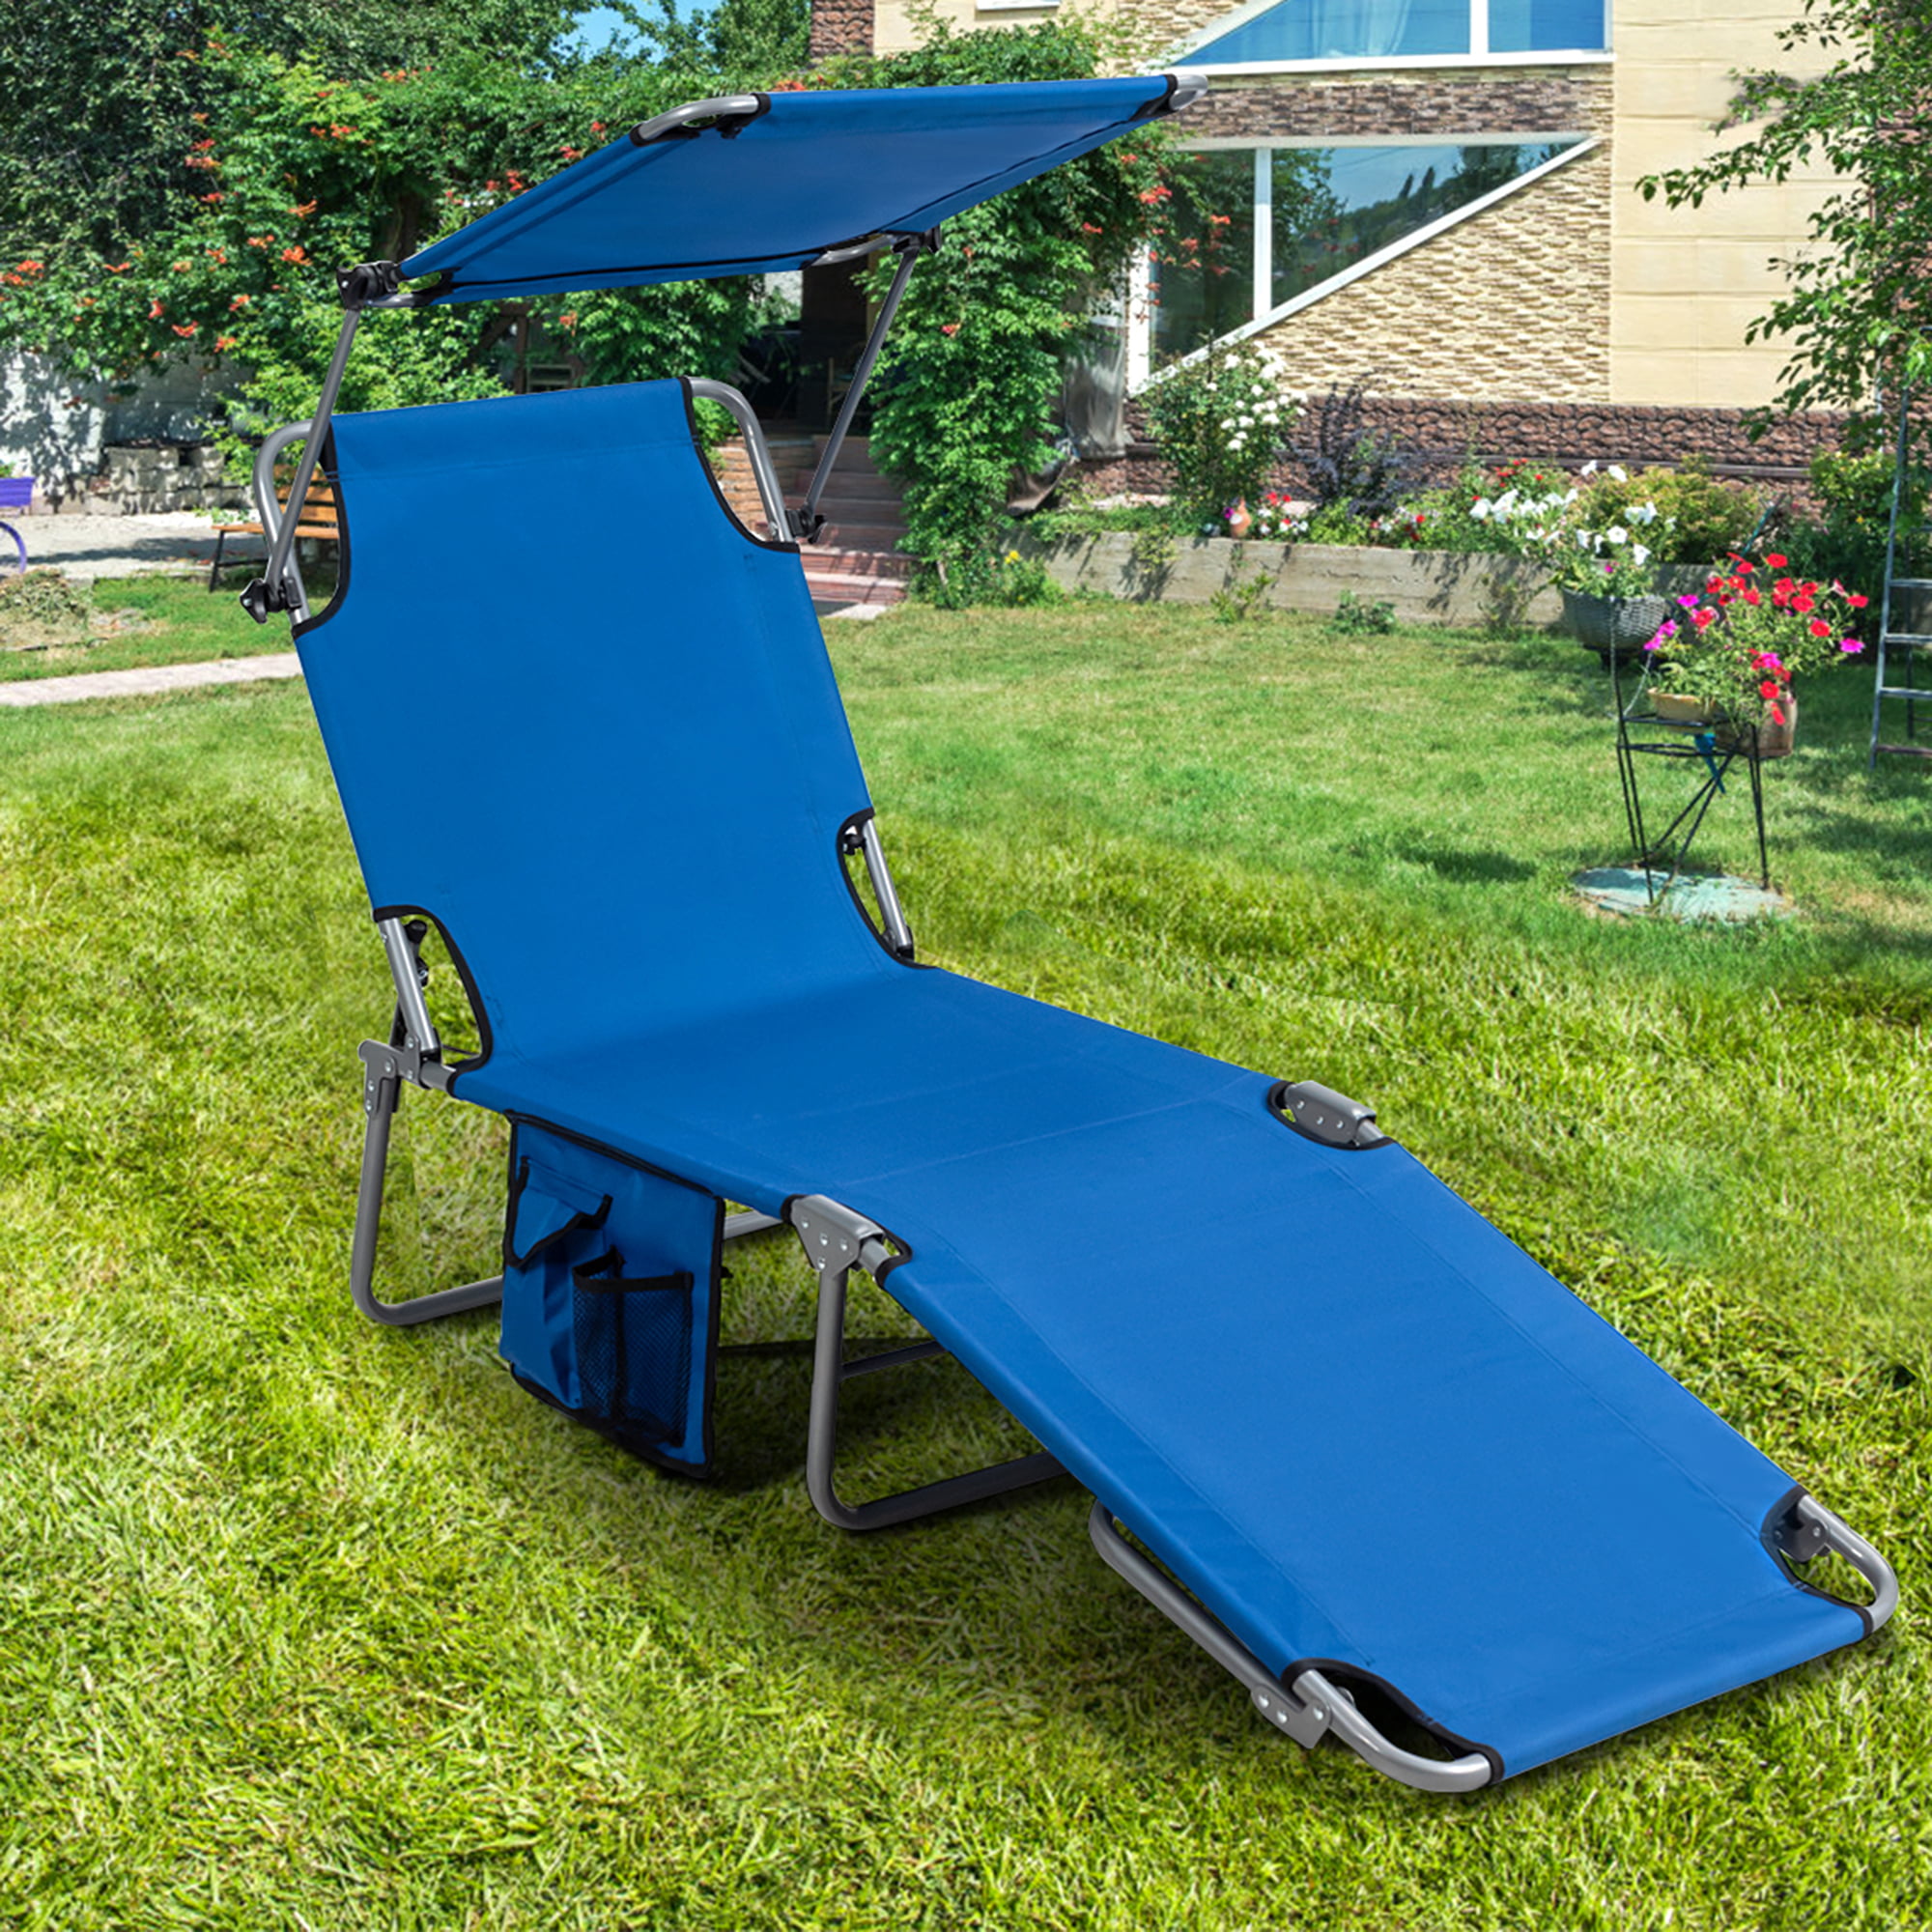 Gymax Foldable Lounge Chair Adjustable Outdoor Beach Patio Pool